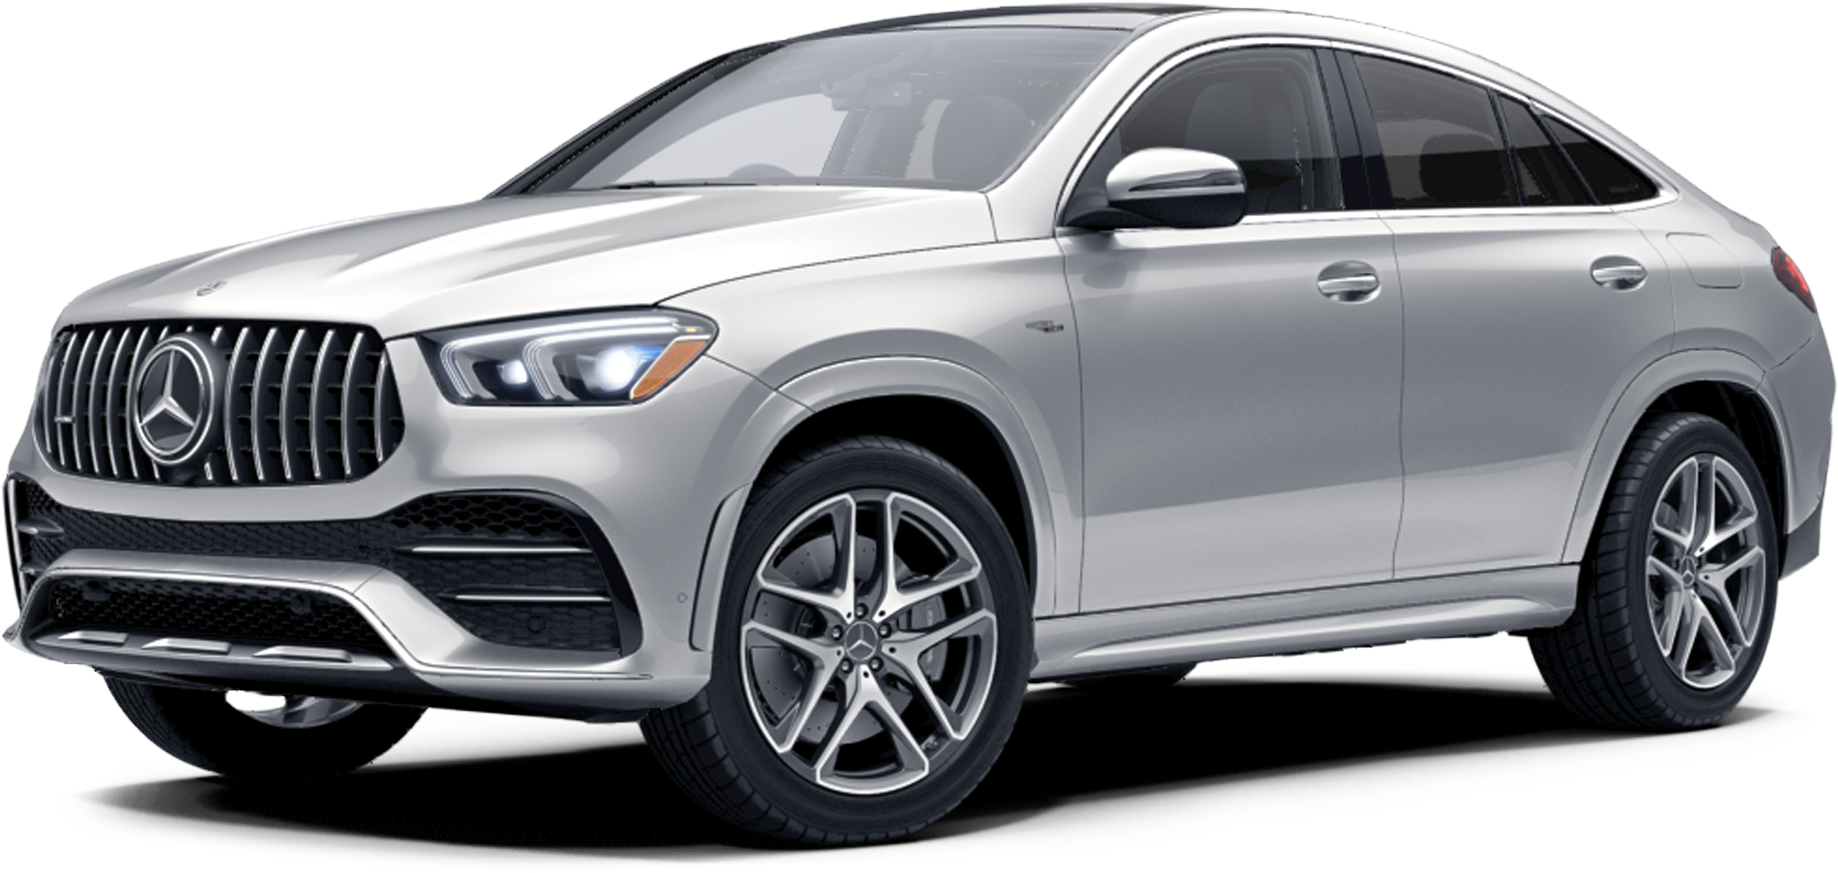 2021 Mercedes-Benz AMG GLE 53 Incentives, Specials & Offers in Peabody MA